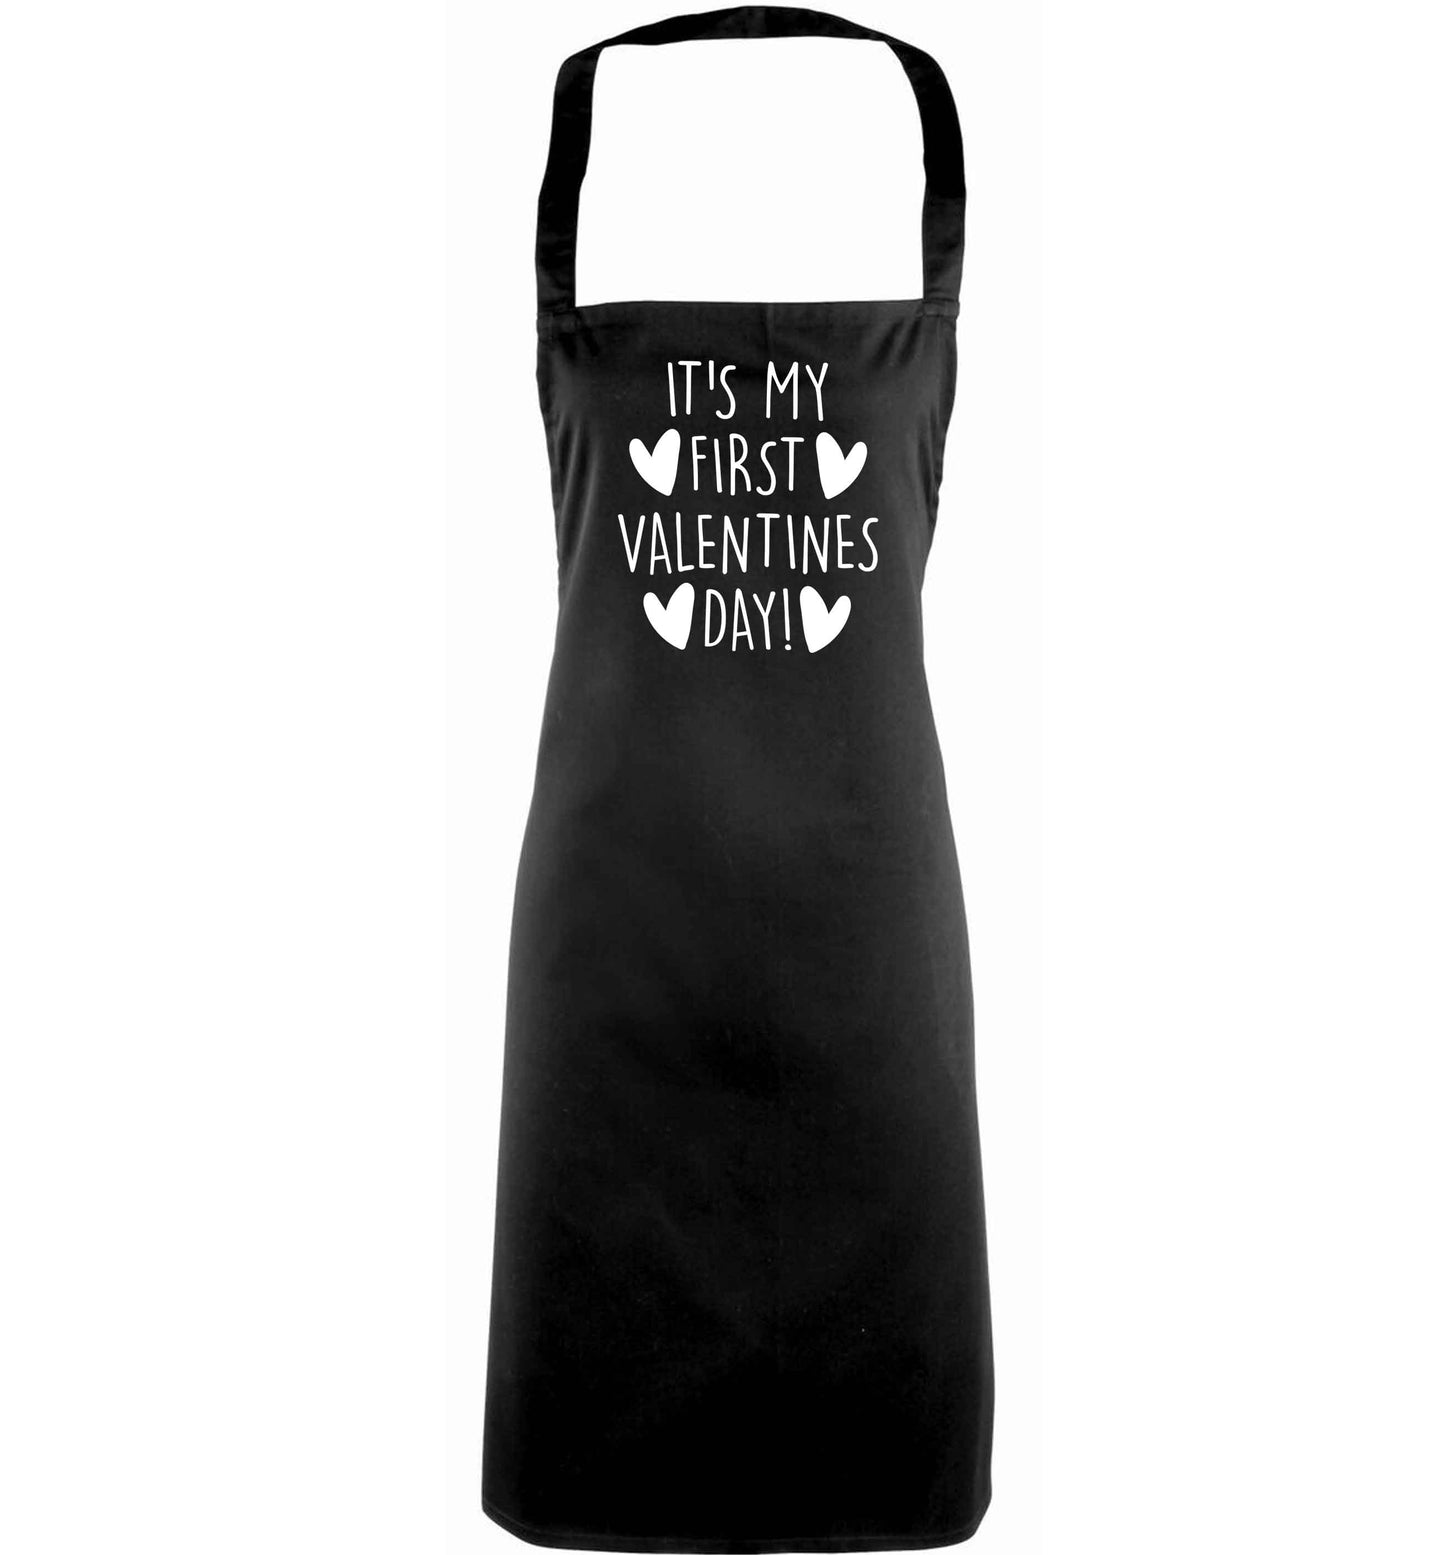 It's my first valentines day! adults black apron